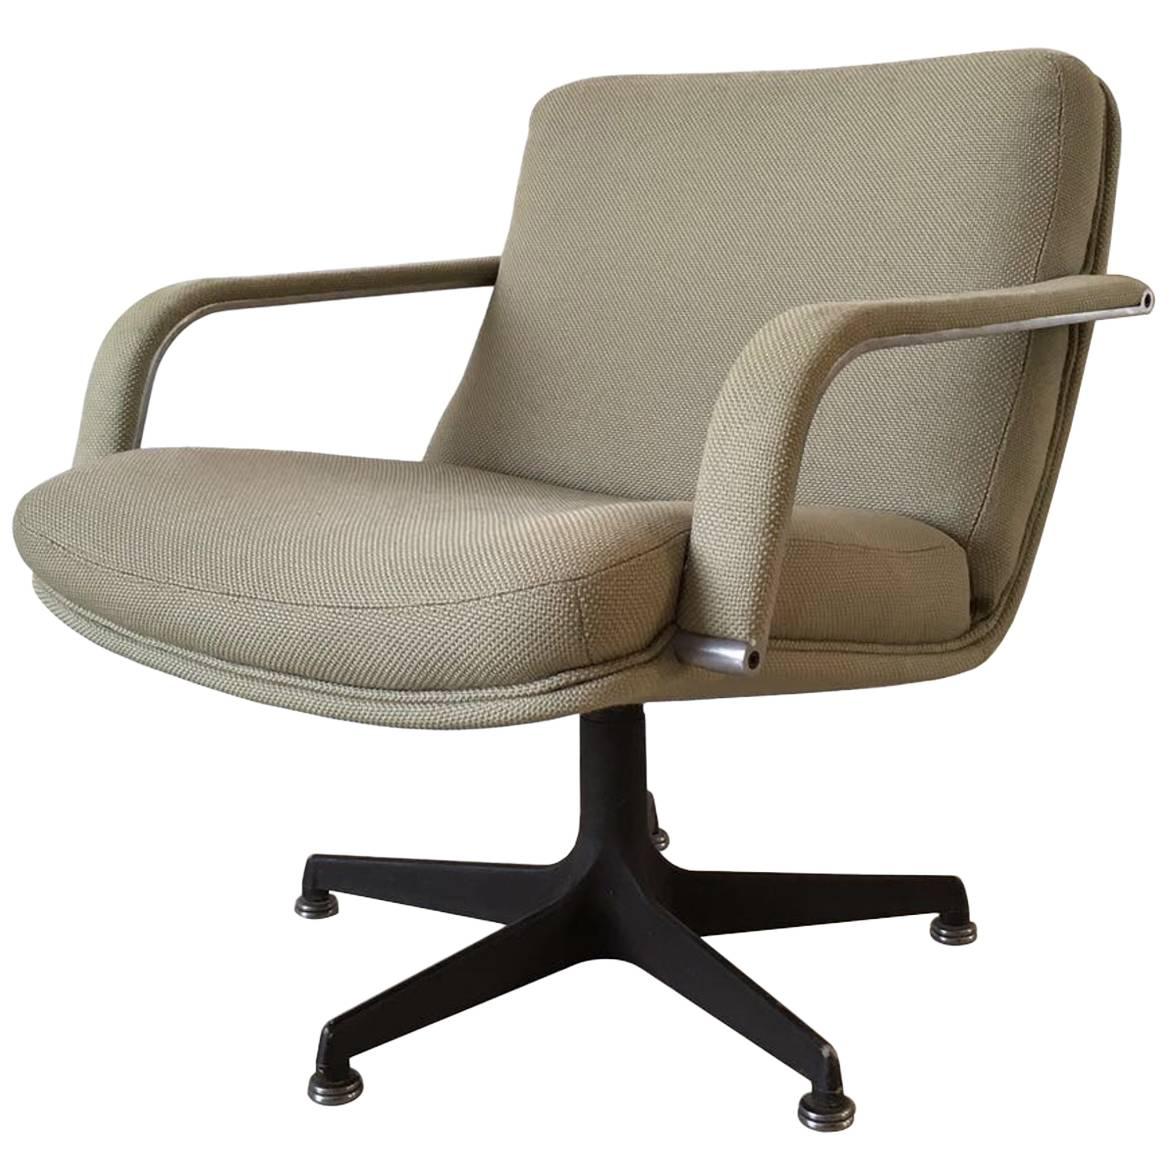 Iconic 1970s Design Swivel Chair from Artifort, Designed by Geoffrey Harcourt